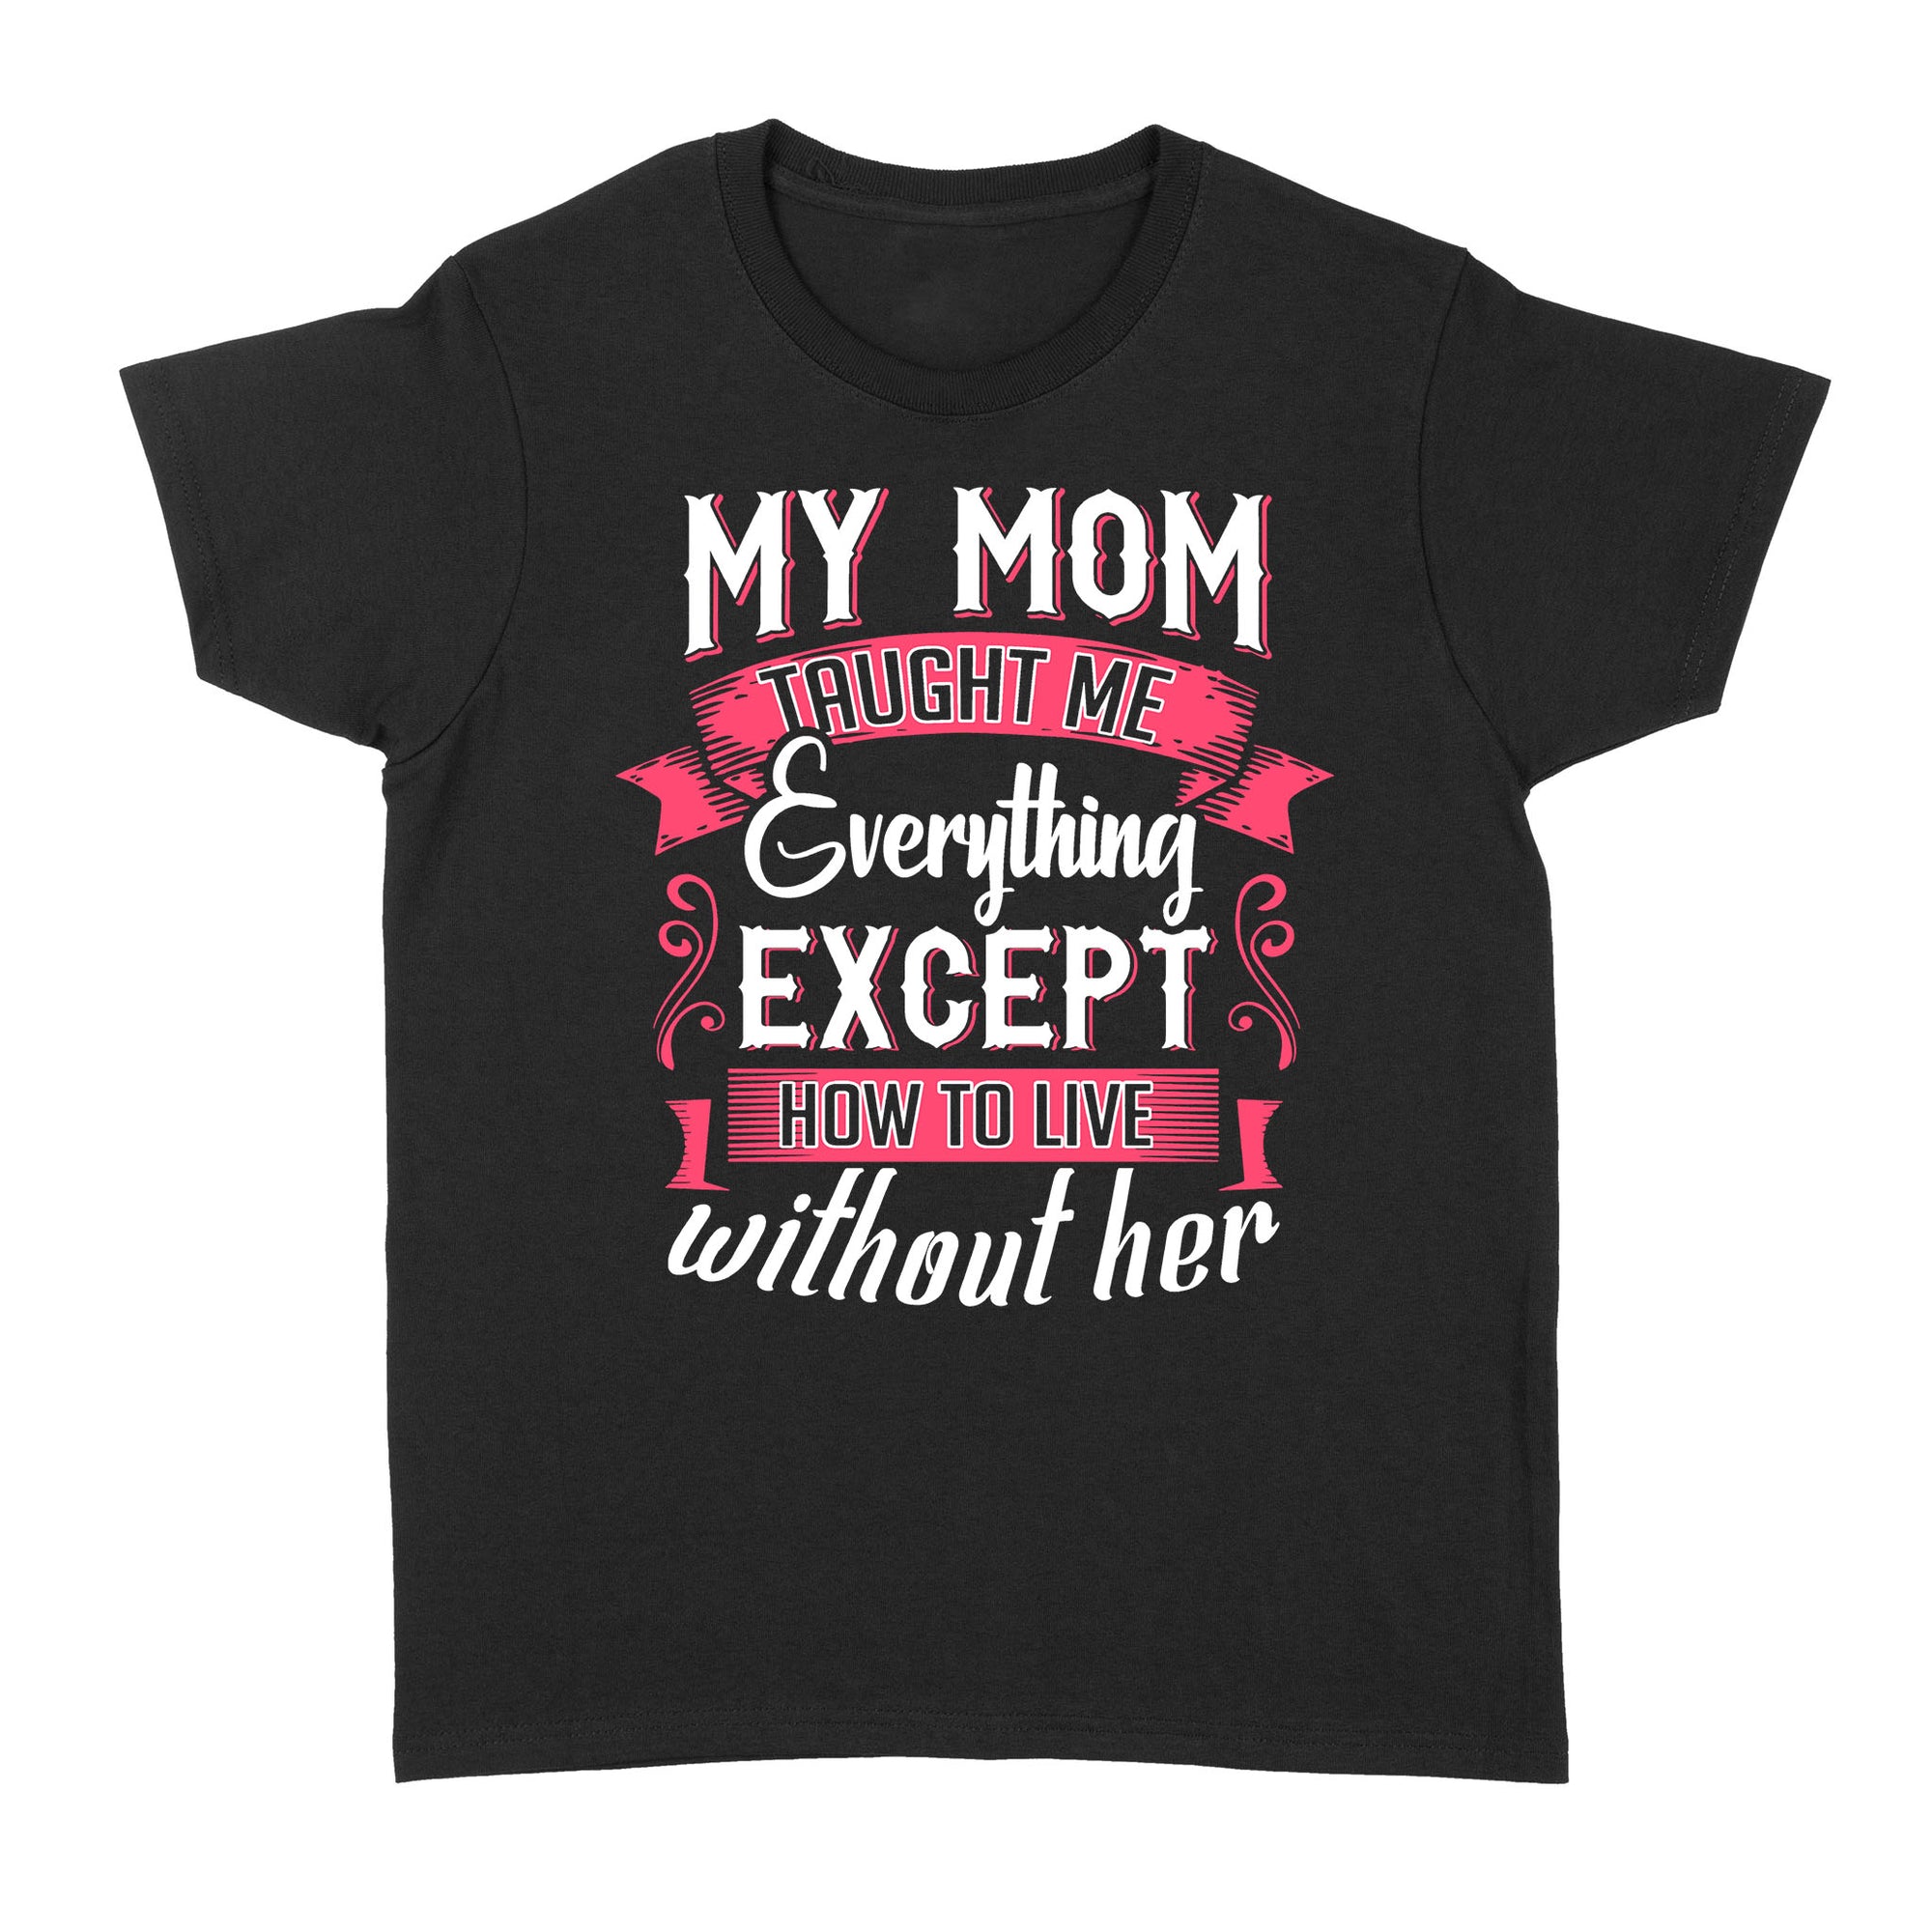 Gift Ideas for Daughter My Mom Taught Me Everything Except How To Live Without Her - Standard Women's T-shirt